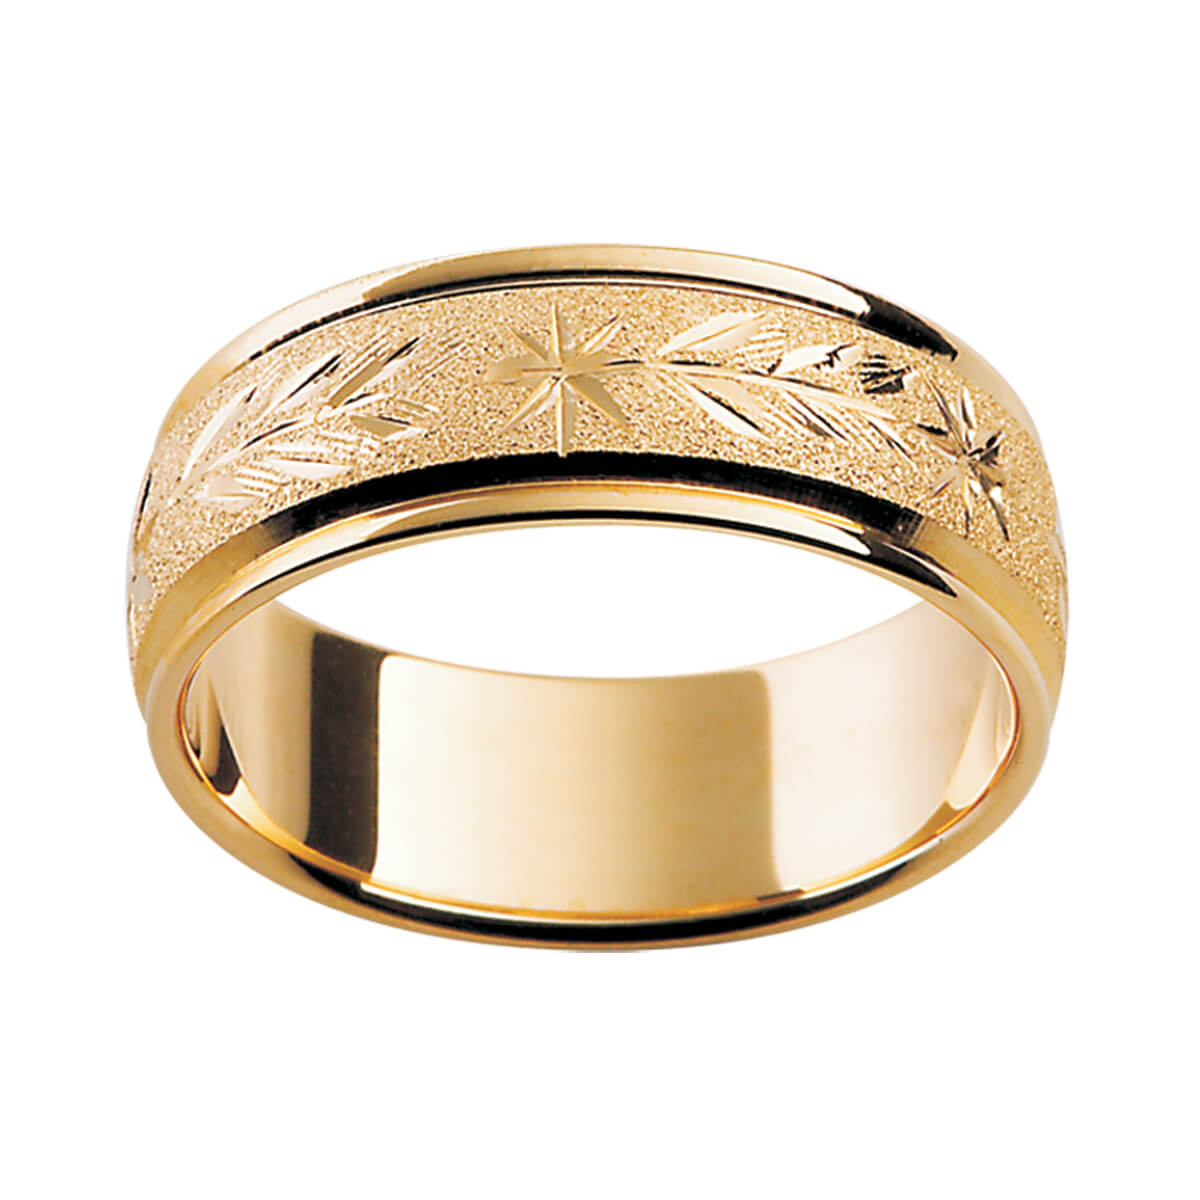 Hand Engraved Two Tone Wedding Band Carved Ring 14k Gold 6.5mm - UB339